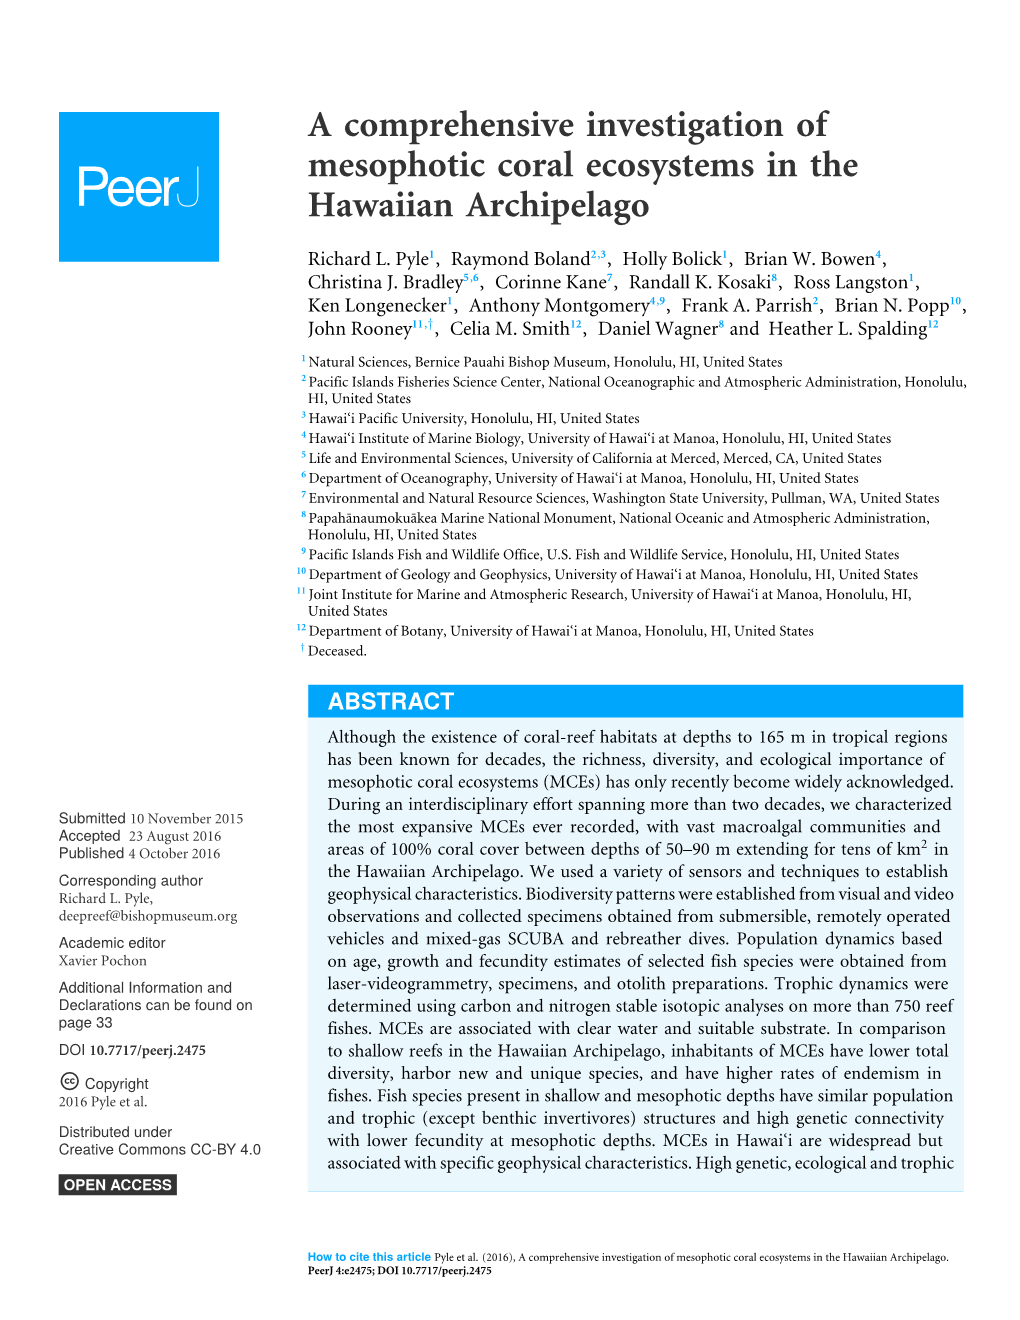 A Comprehensive Investigation of Mesophotic Coral Ecosystems in the Hawaiian Archipelago